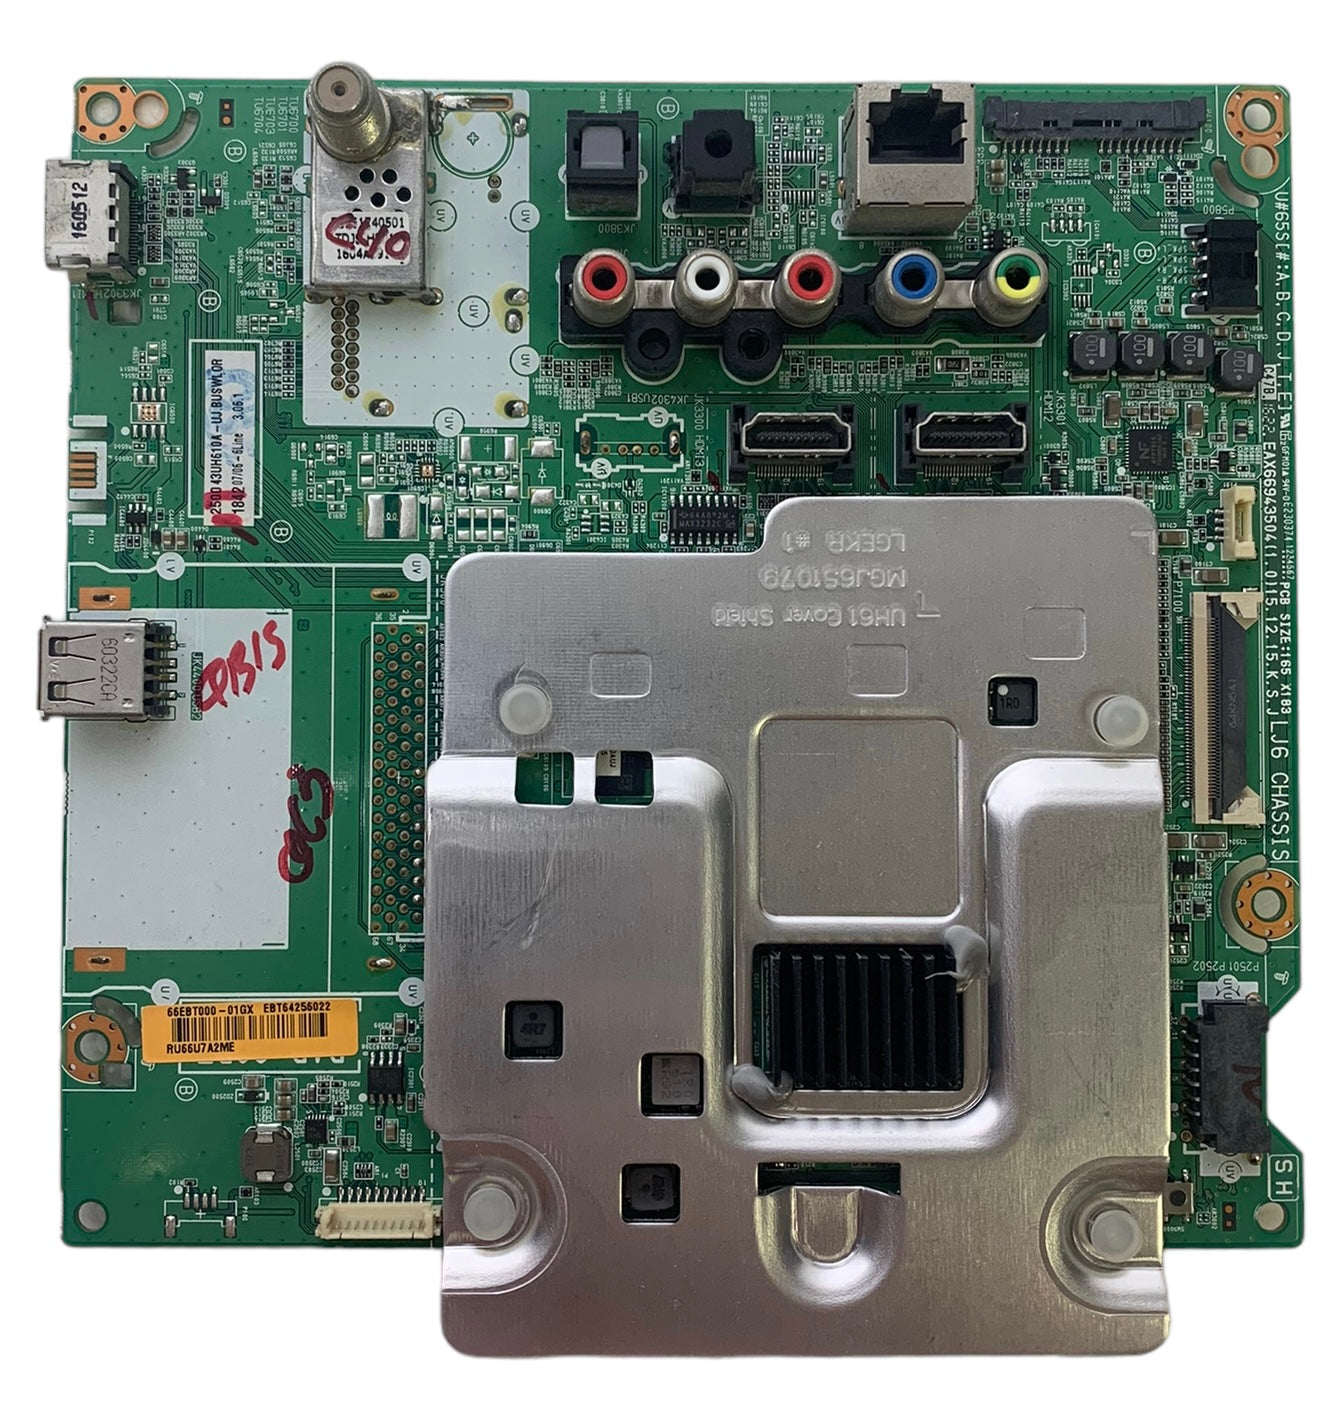 LG EBT64256022 Main Board for 43UH610A-UJ.BUSWLOR